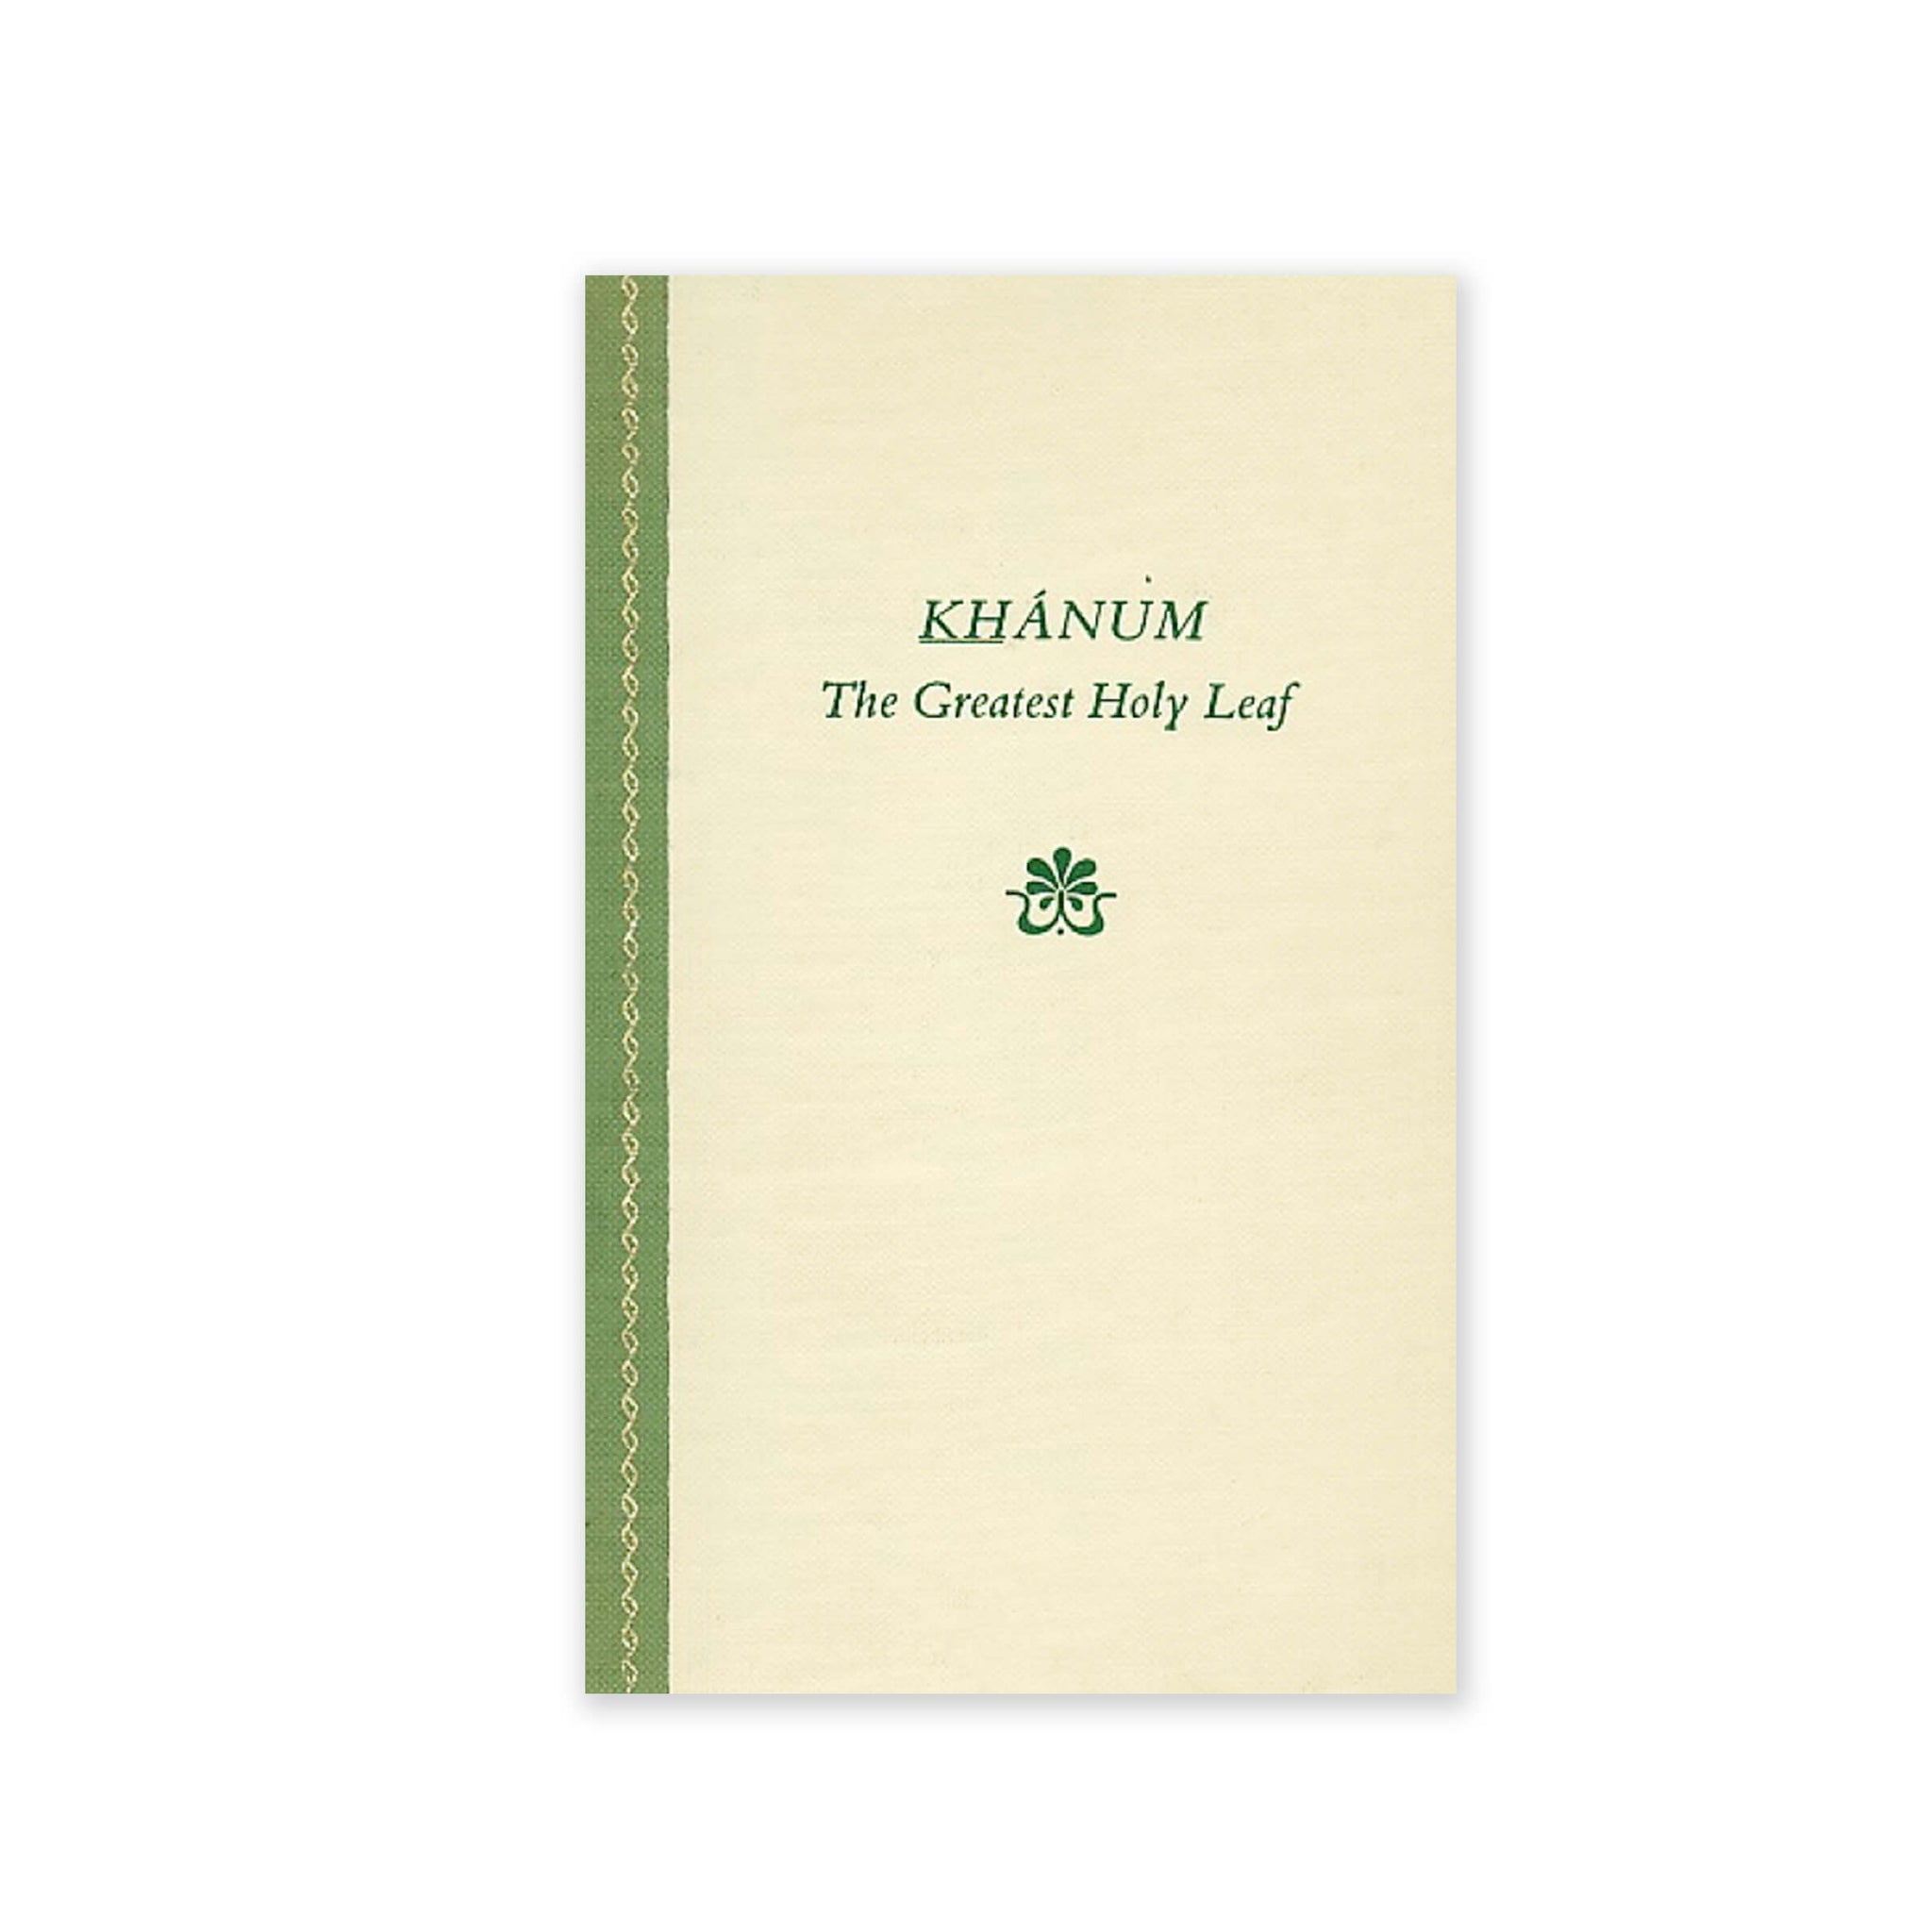 Khanum, The Greatest Holy Leaf - As remembered by Marzieh Gail